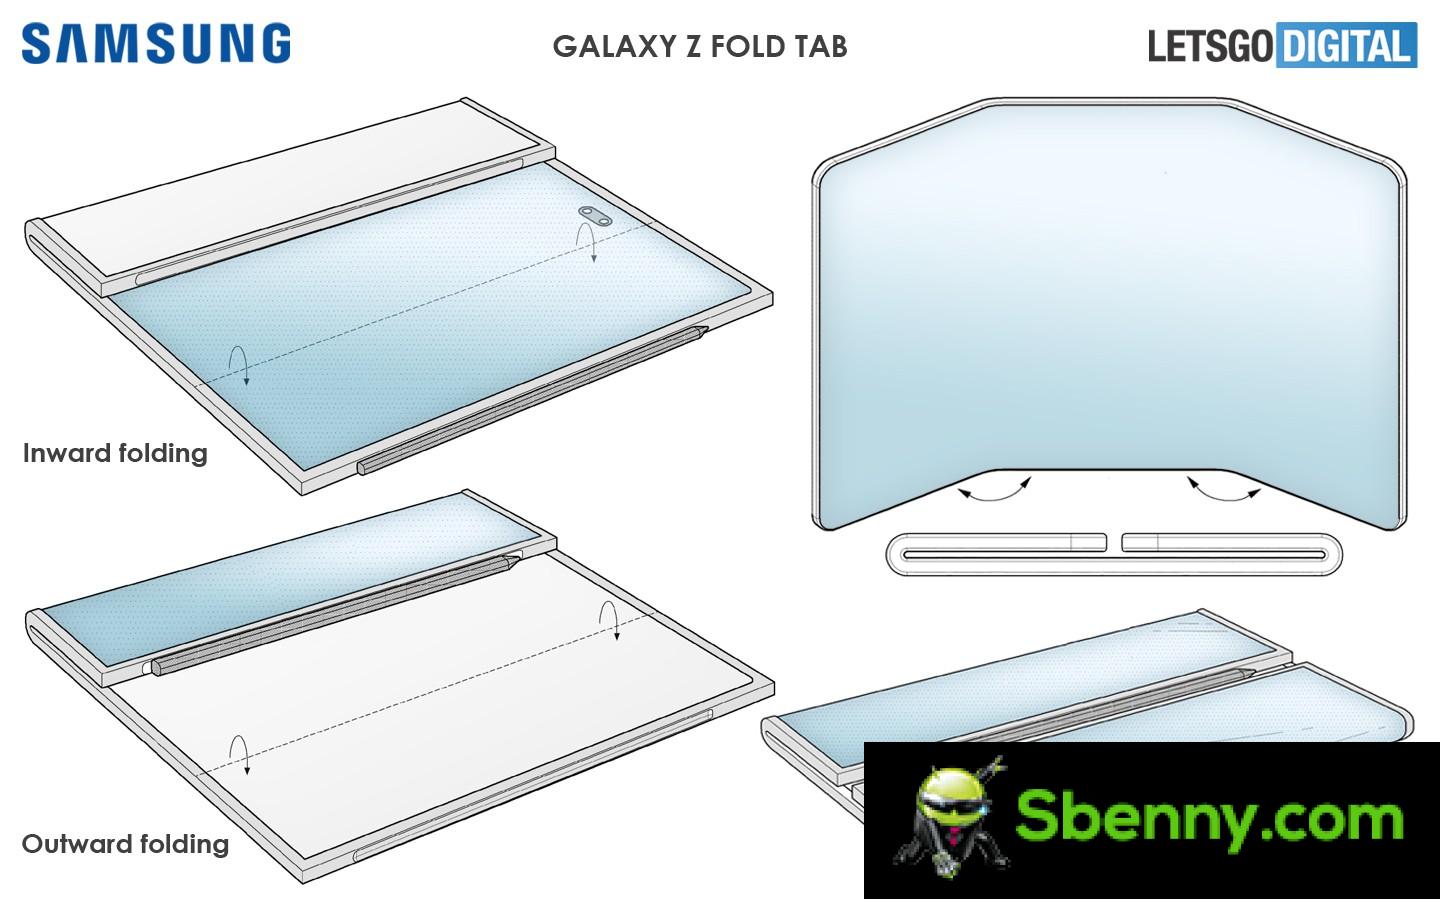 A Samsung-patented dual-fold tablet design